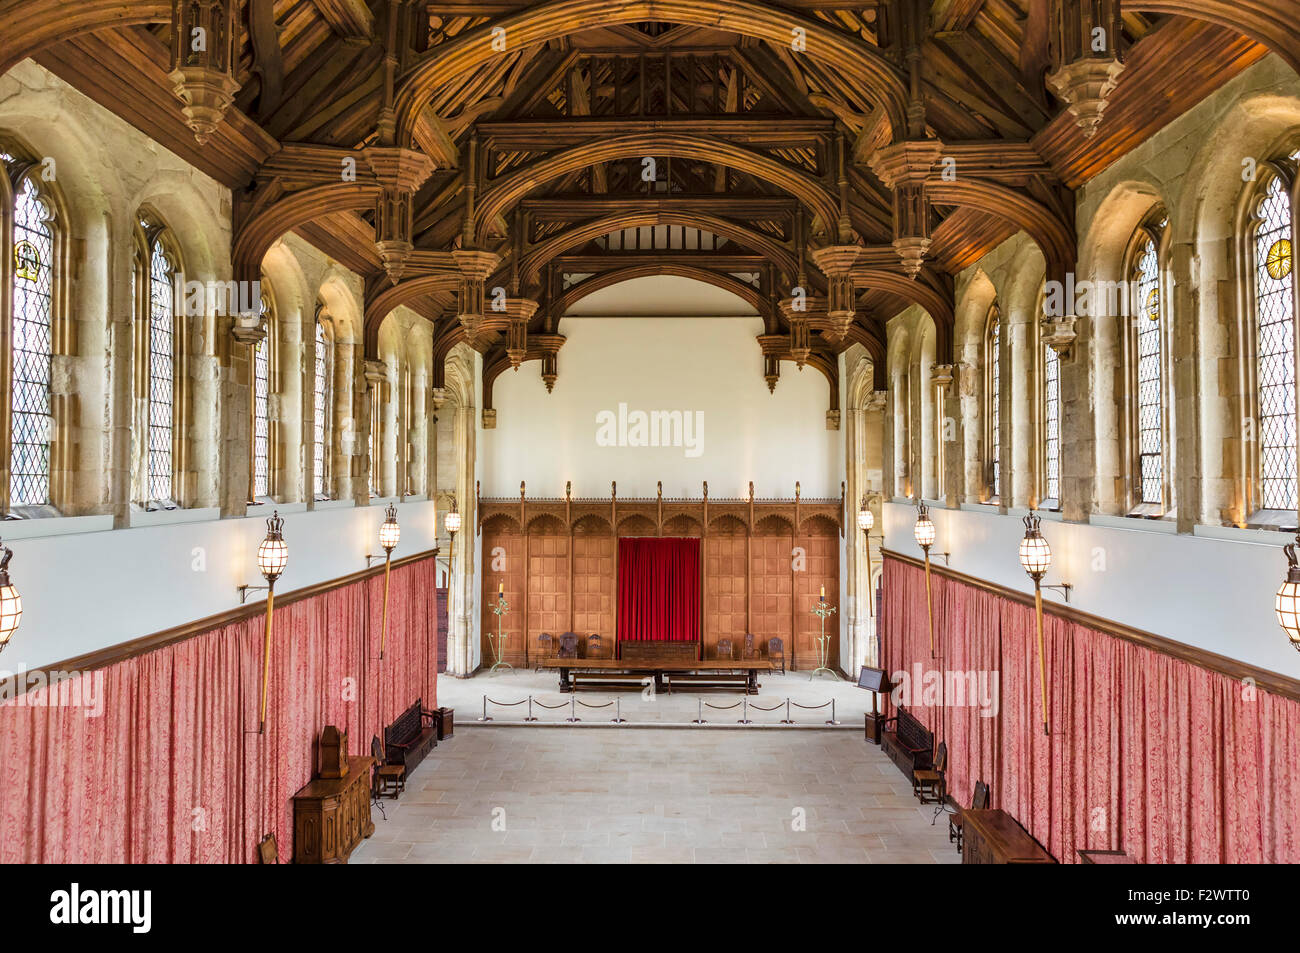 The 15thC Great Hall in Eltham Palace, the former home of Stephen Courtauld and Virginia Courtauld, Eltham, London, England, UK Stock Photo